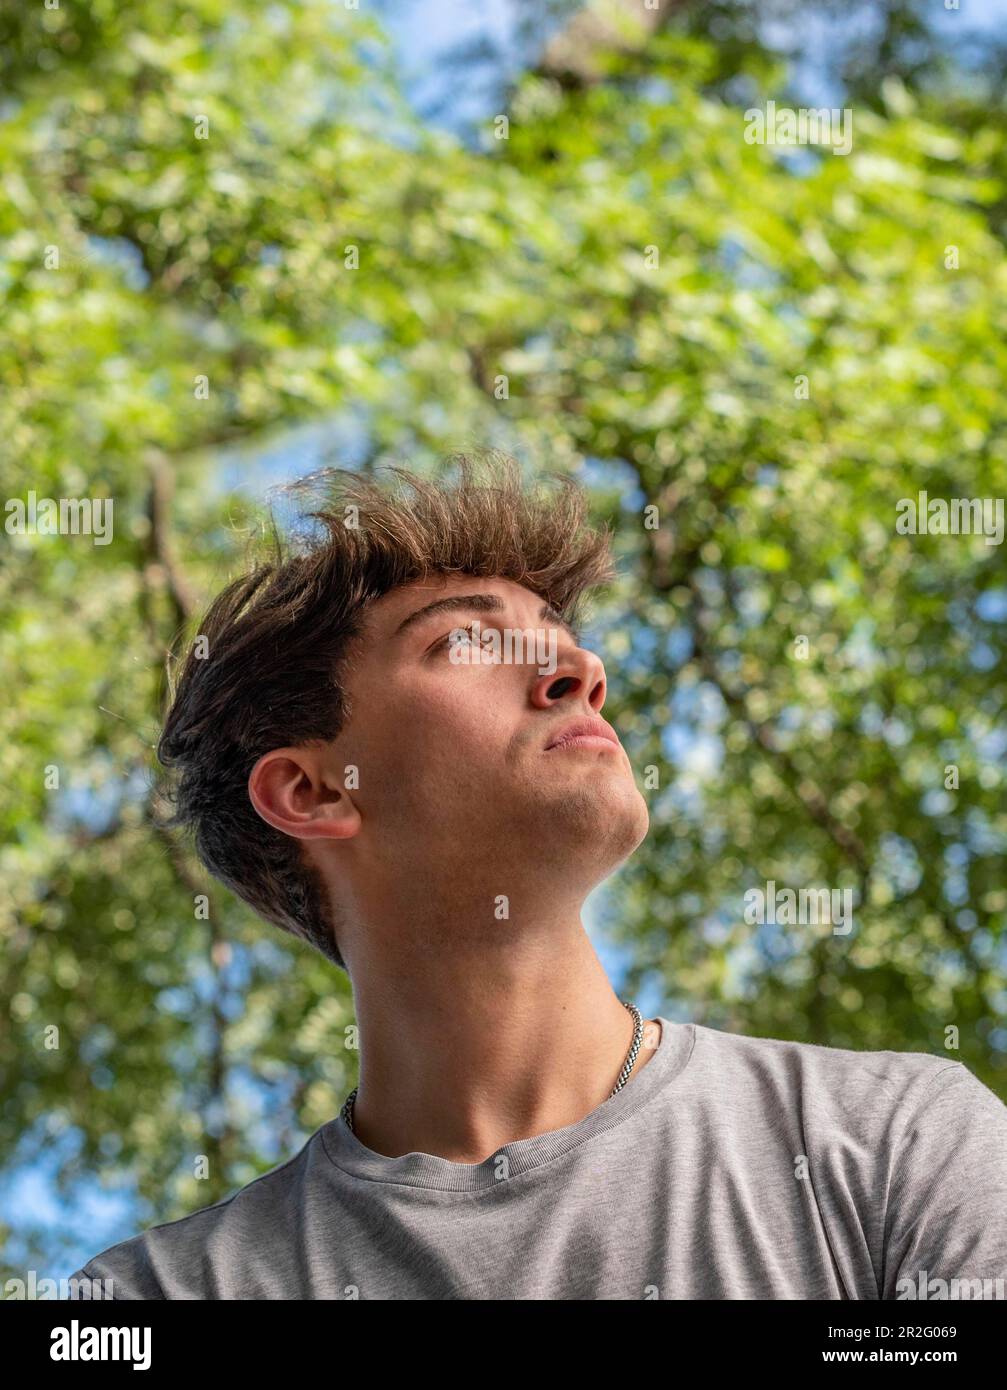 Side view of a young man who is looking up over nature background Stock Photo